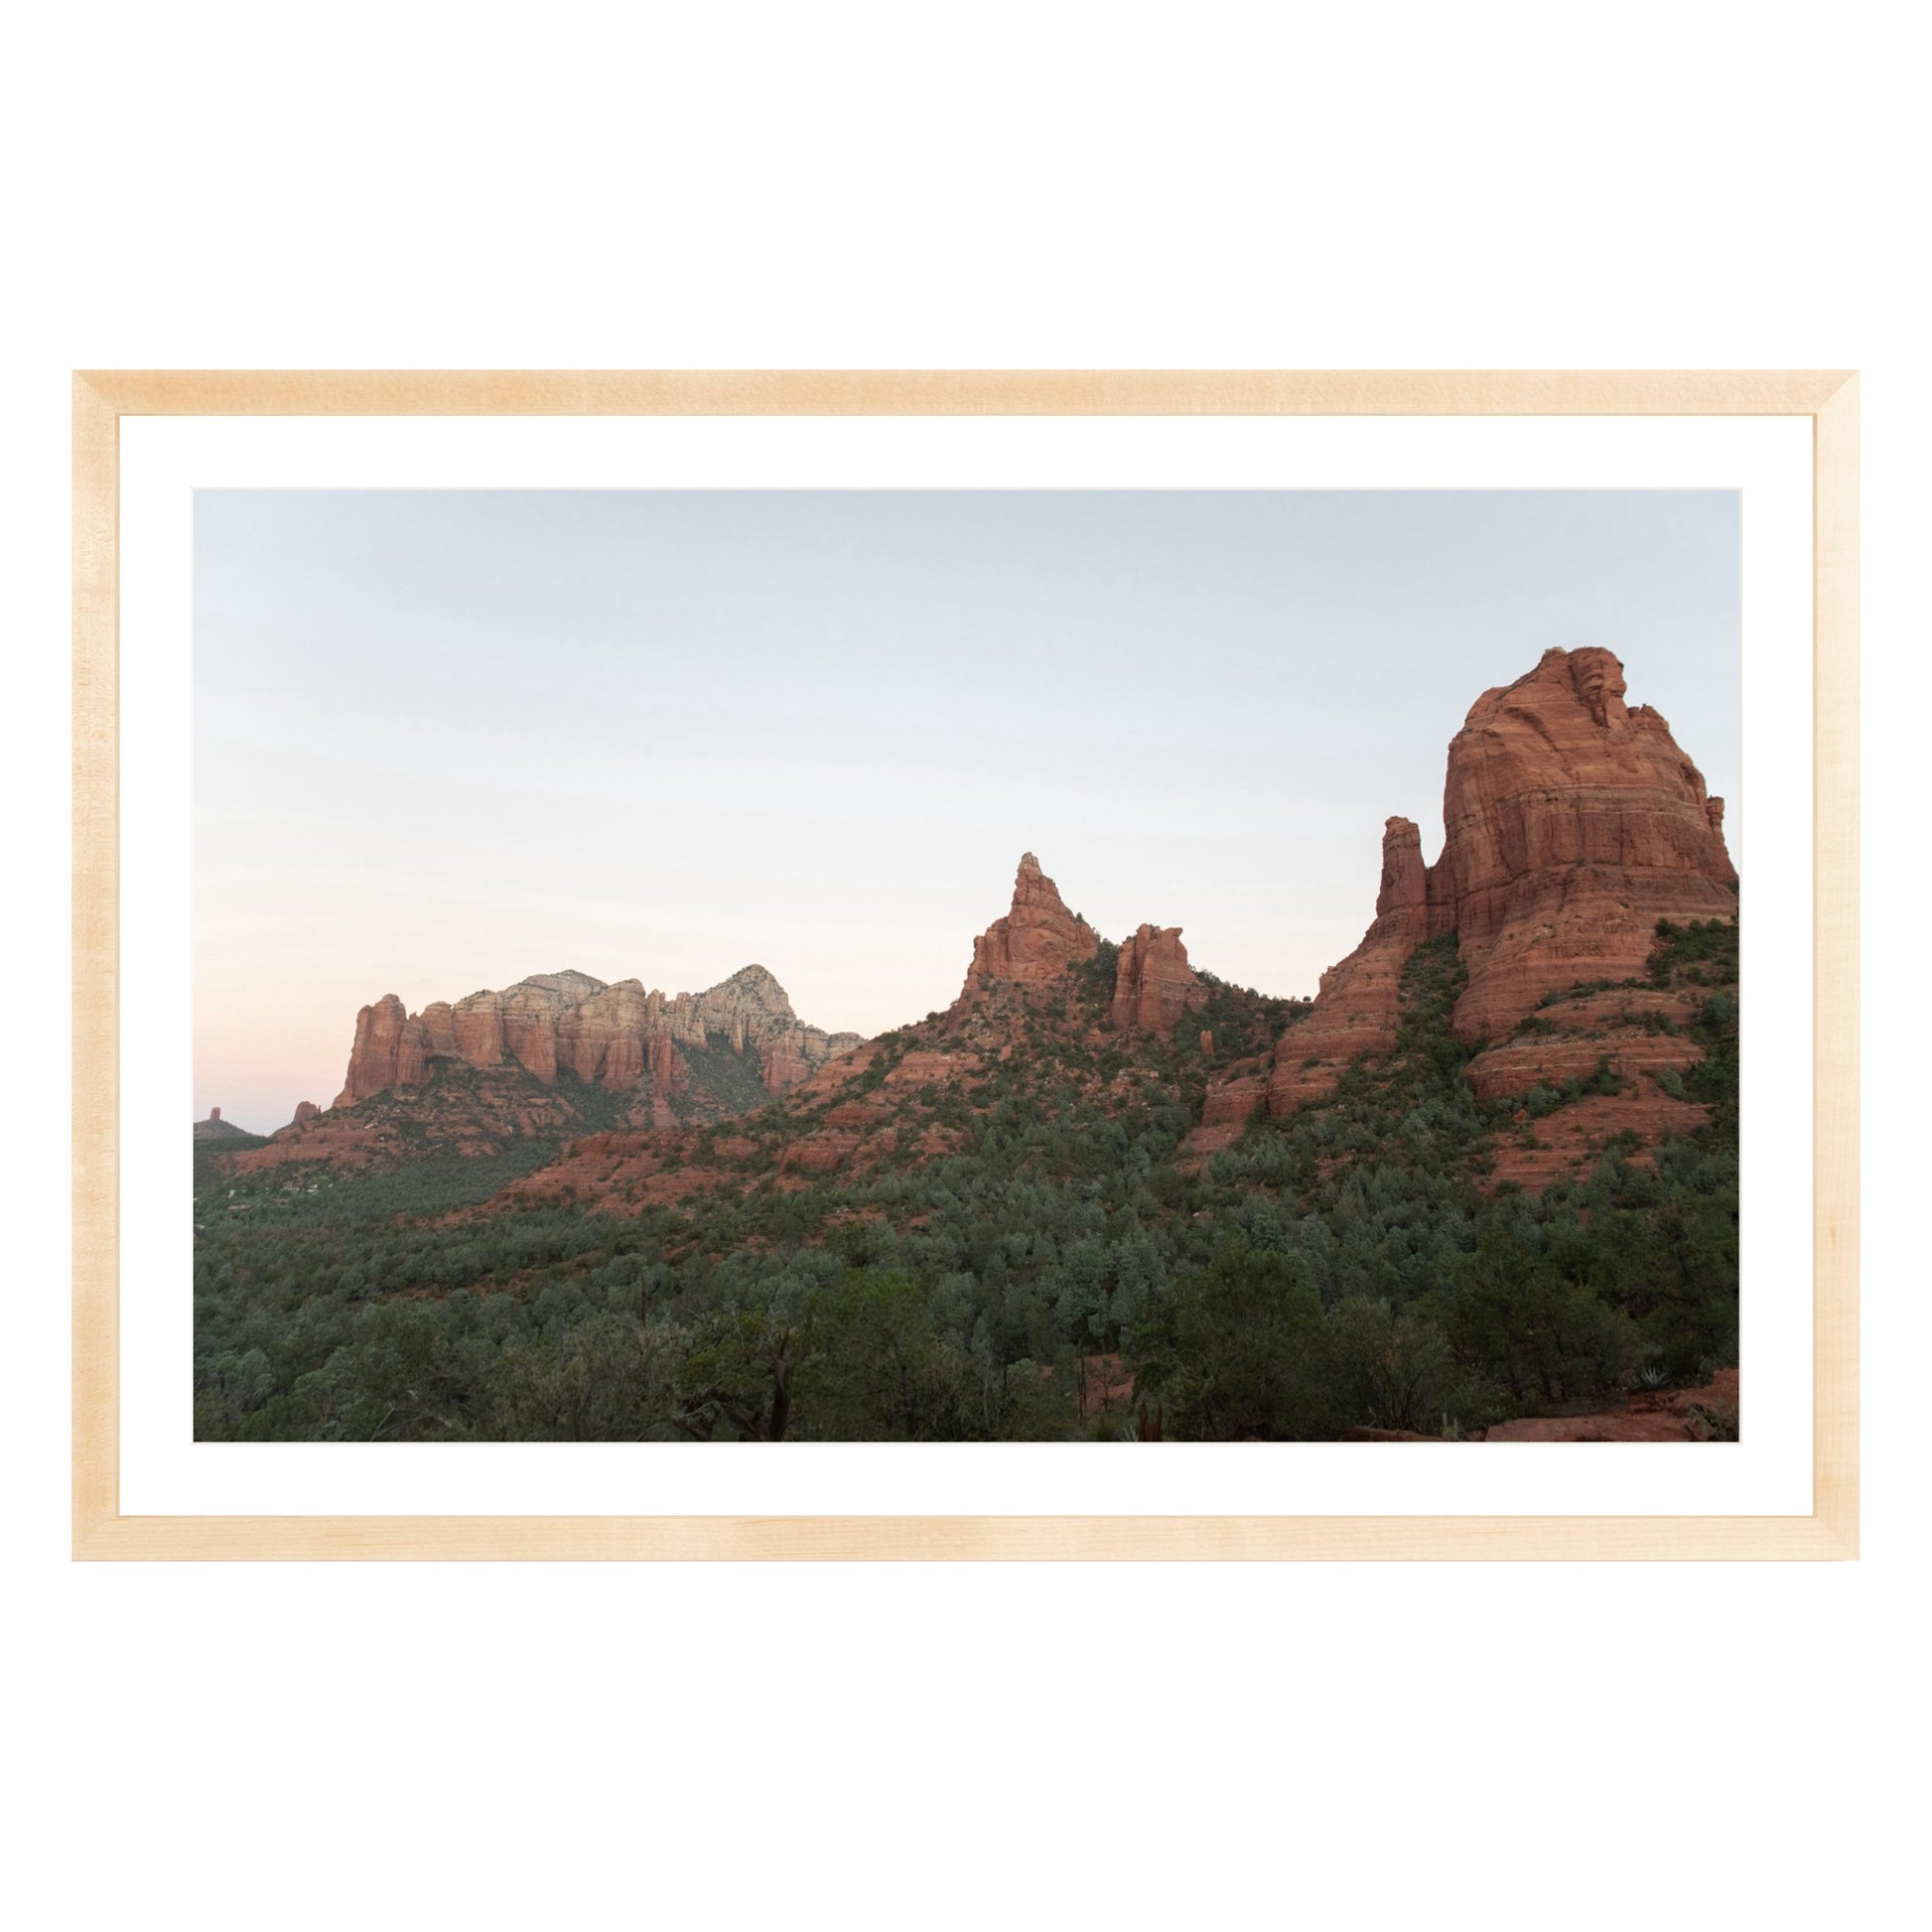 Photograph of Boynton Canyon in Sedona Arizona framed in natural wood with white mat